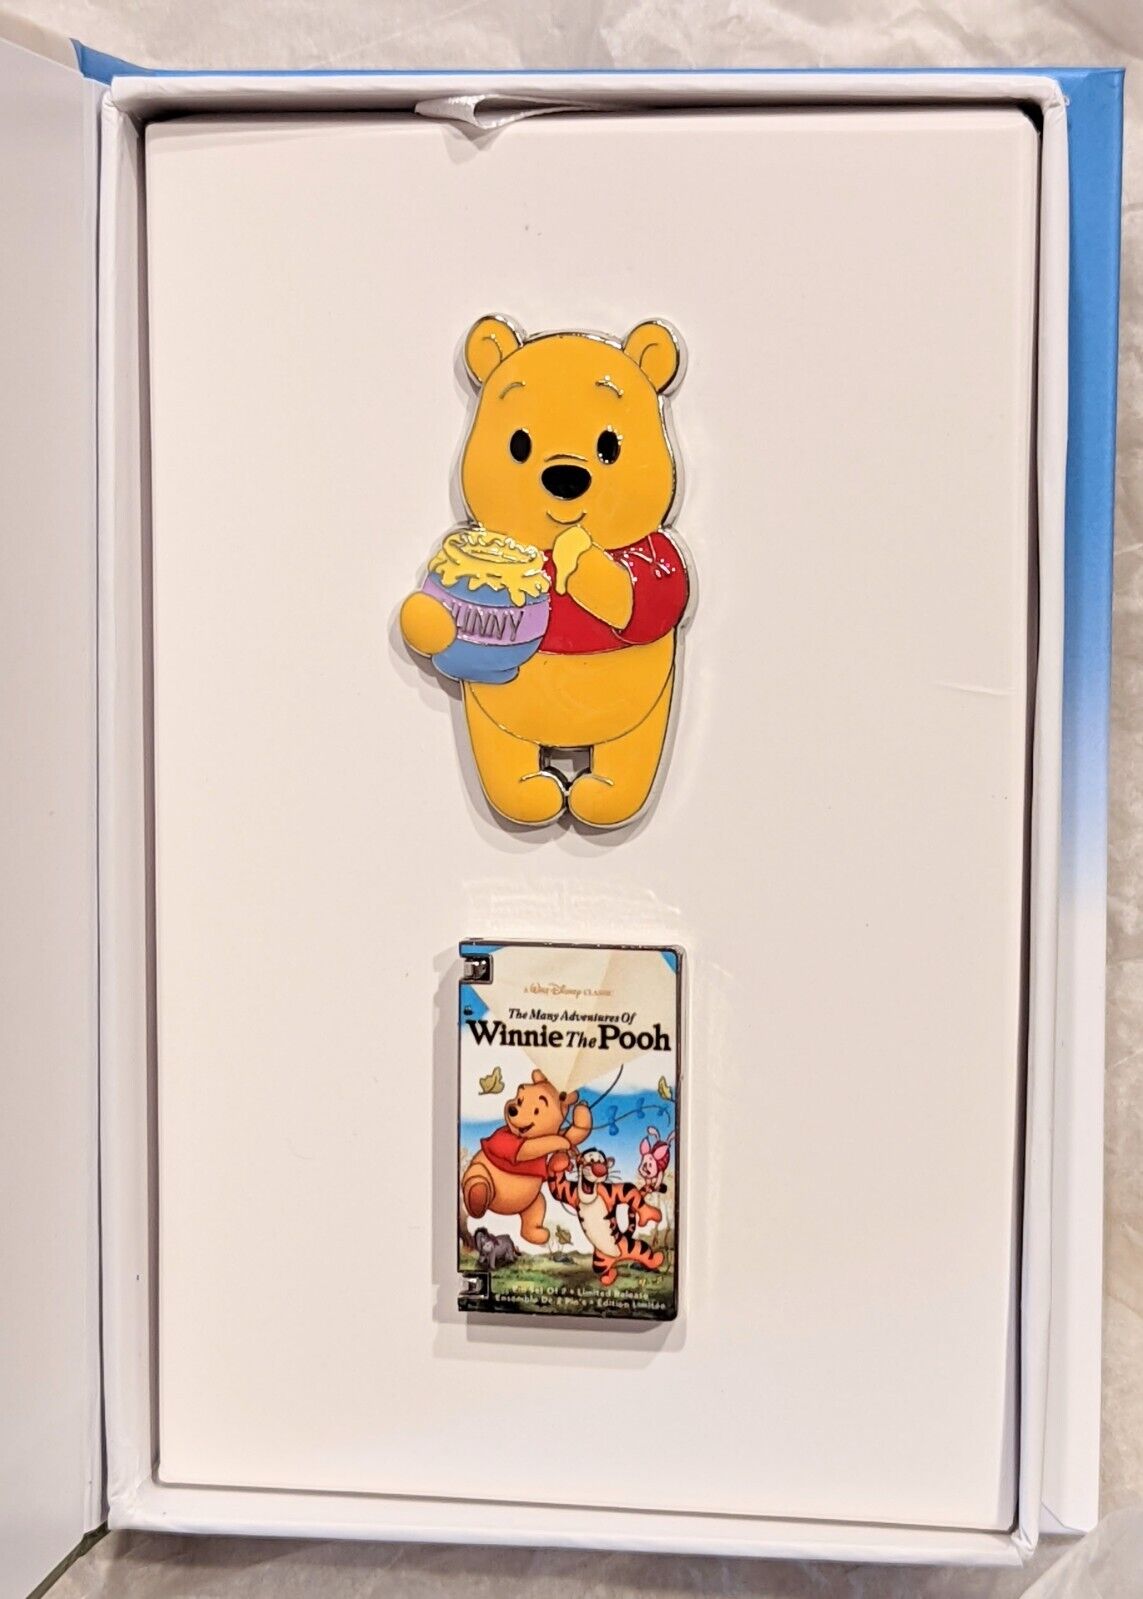 Disney Pin 147958 Ds - Vhs Tape - Winnie The Pooh -collector Box & Hinged Pin Lr